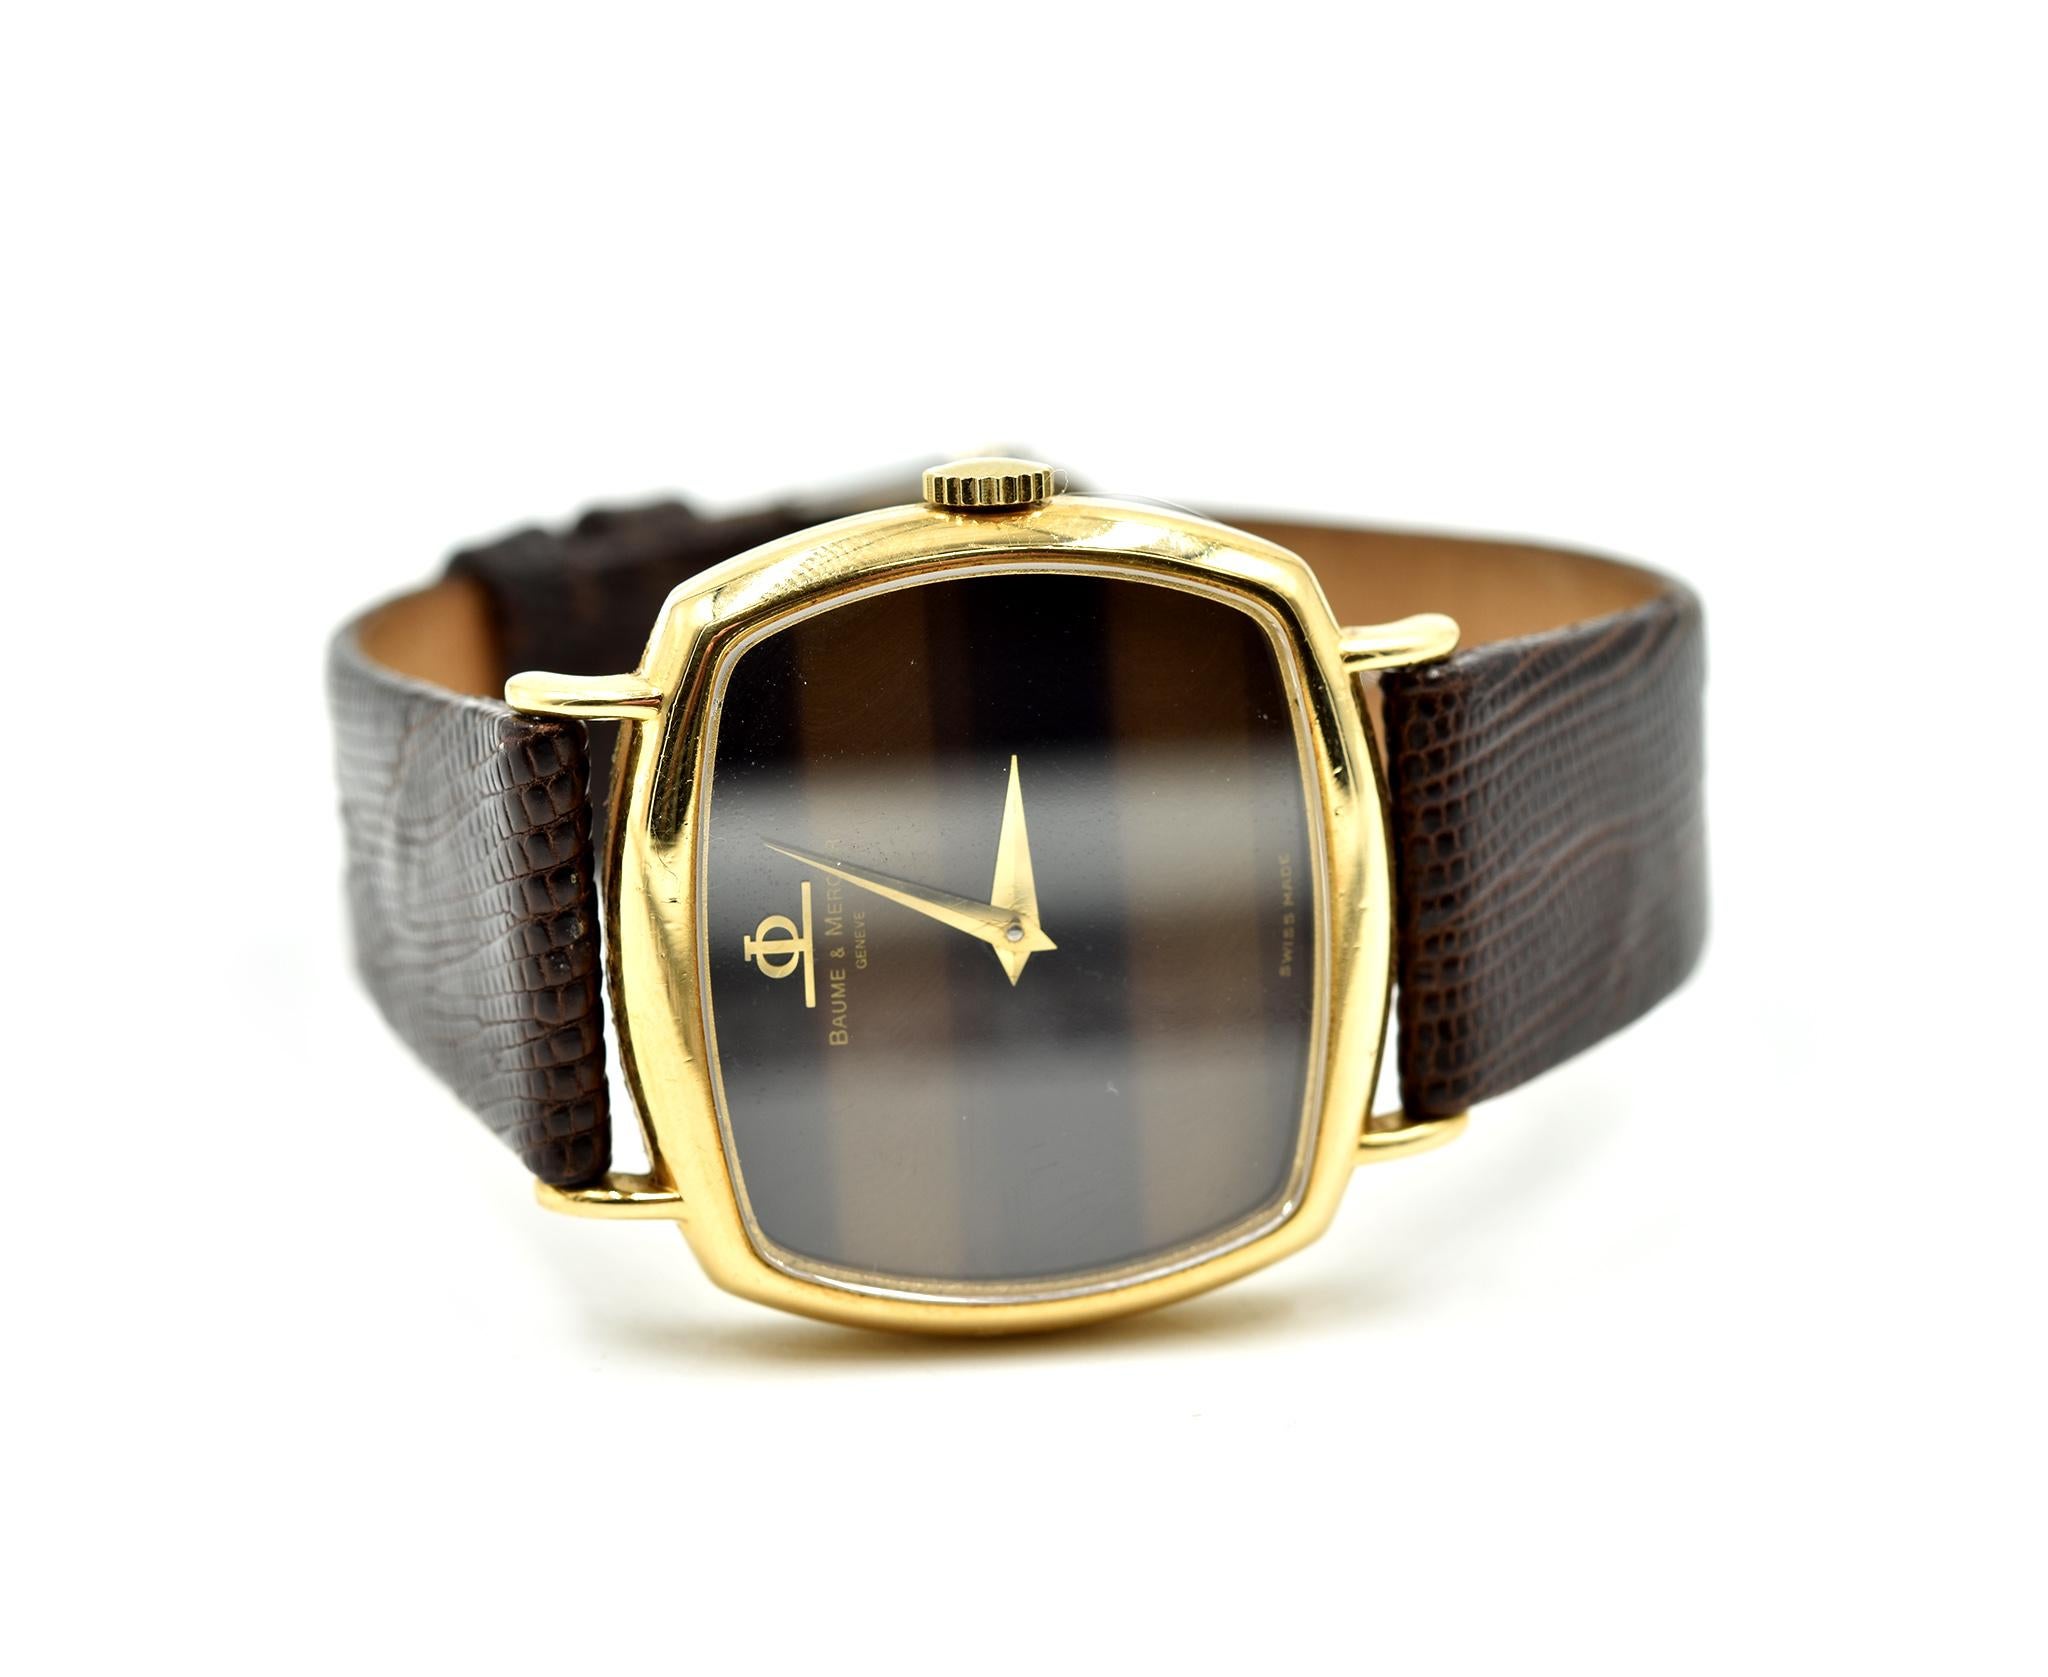 Movement: manual wind
Function: hours, minutes
Case: 32mm 18k yellow gold case with sapphire crystal, pull/push winding crown
Band: brown lizard strap with gold-tone buckle
Dial: tiger eye dial with gold hands 
Reference: M0A01012
Serial #: